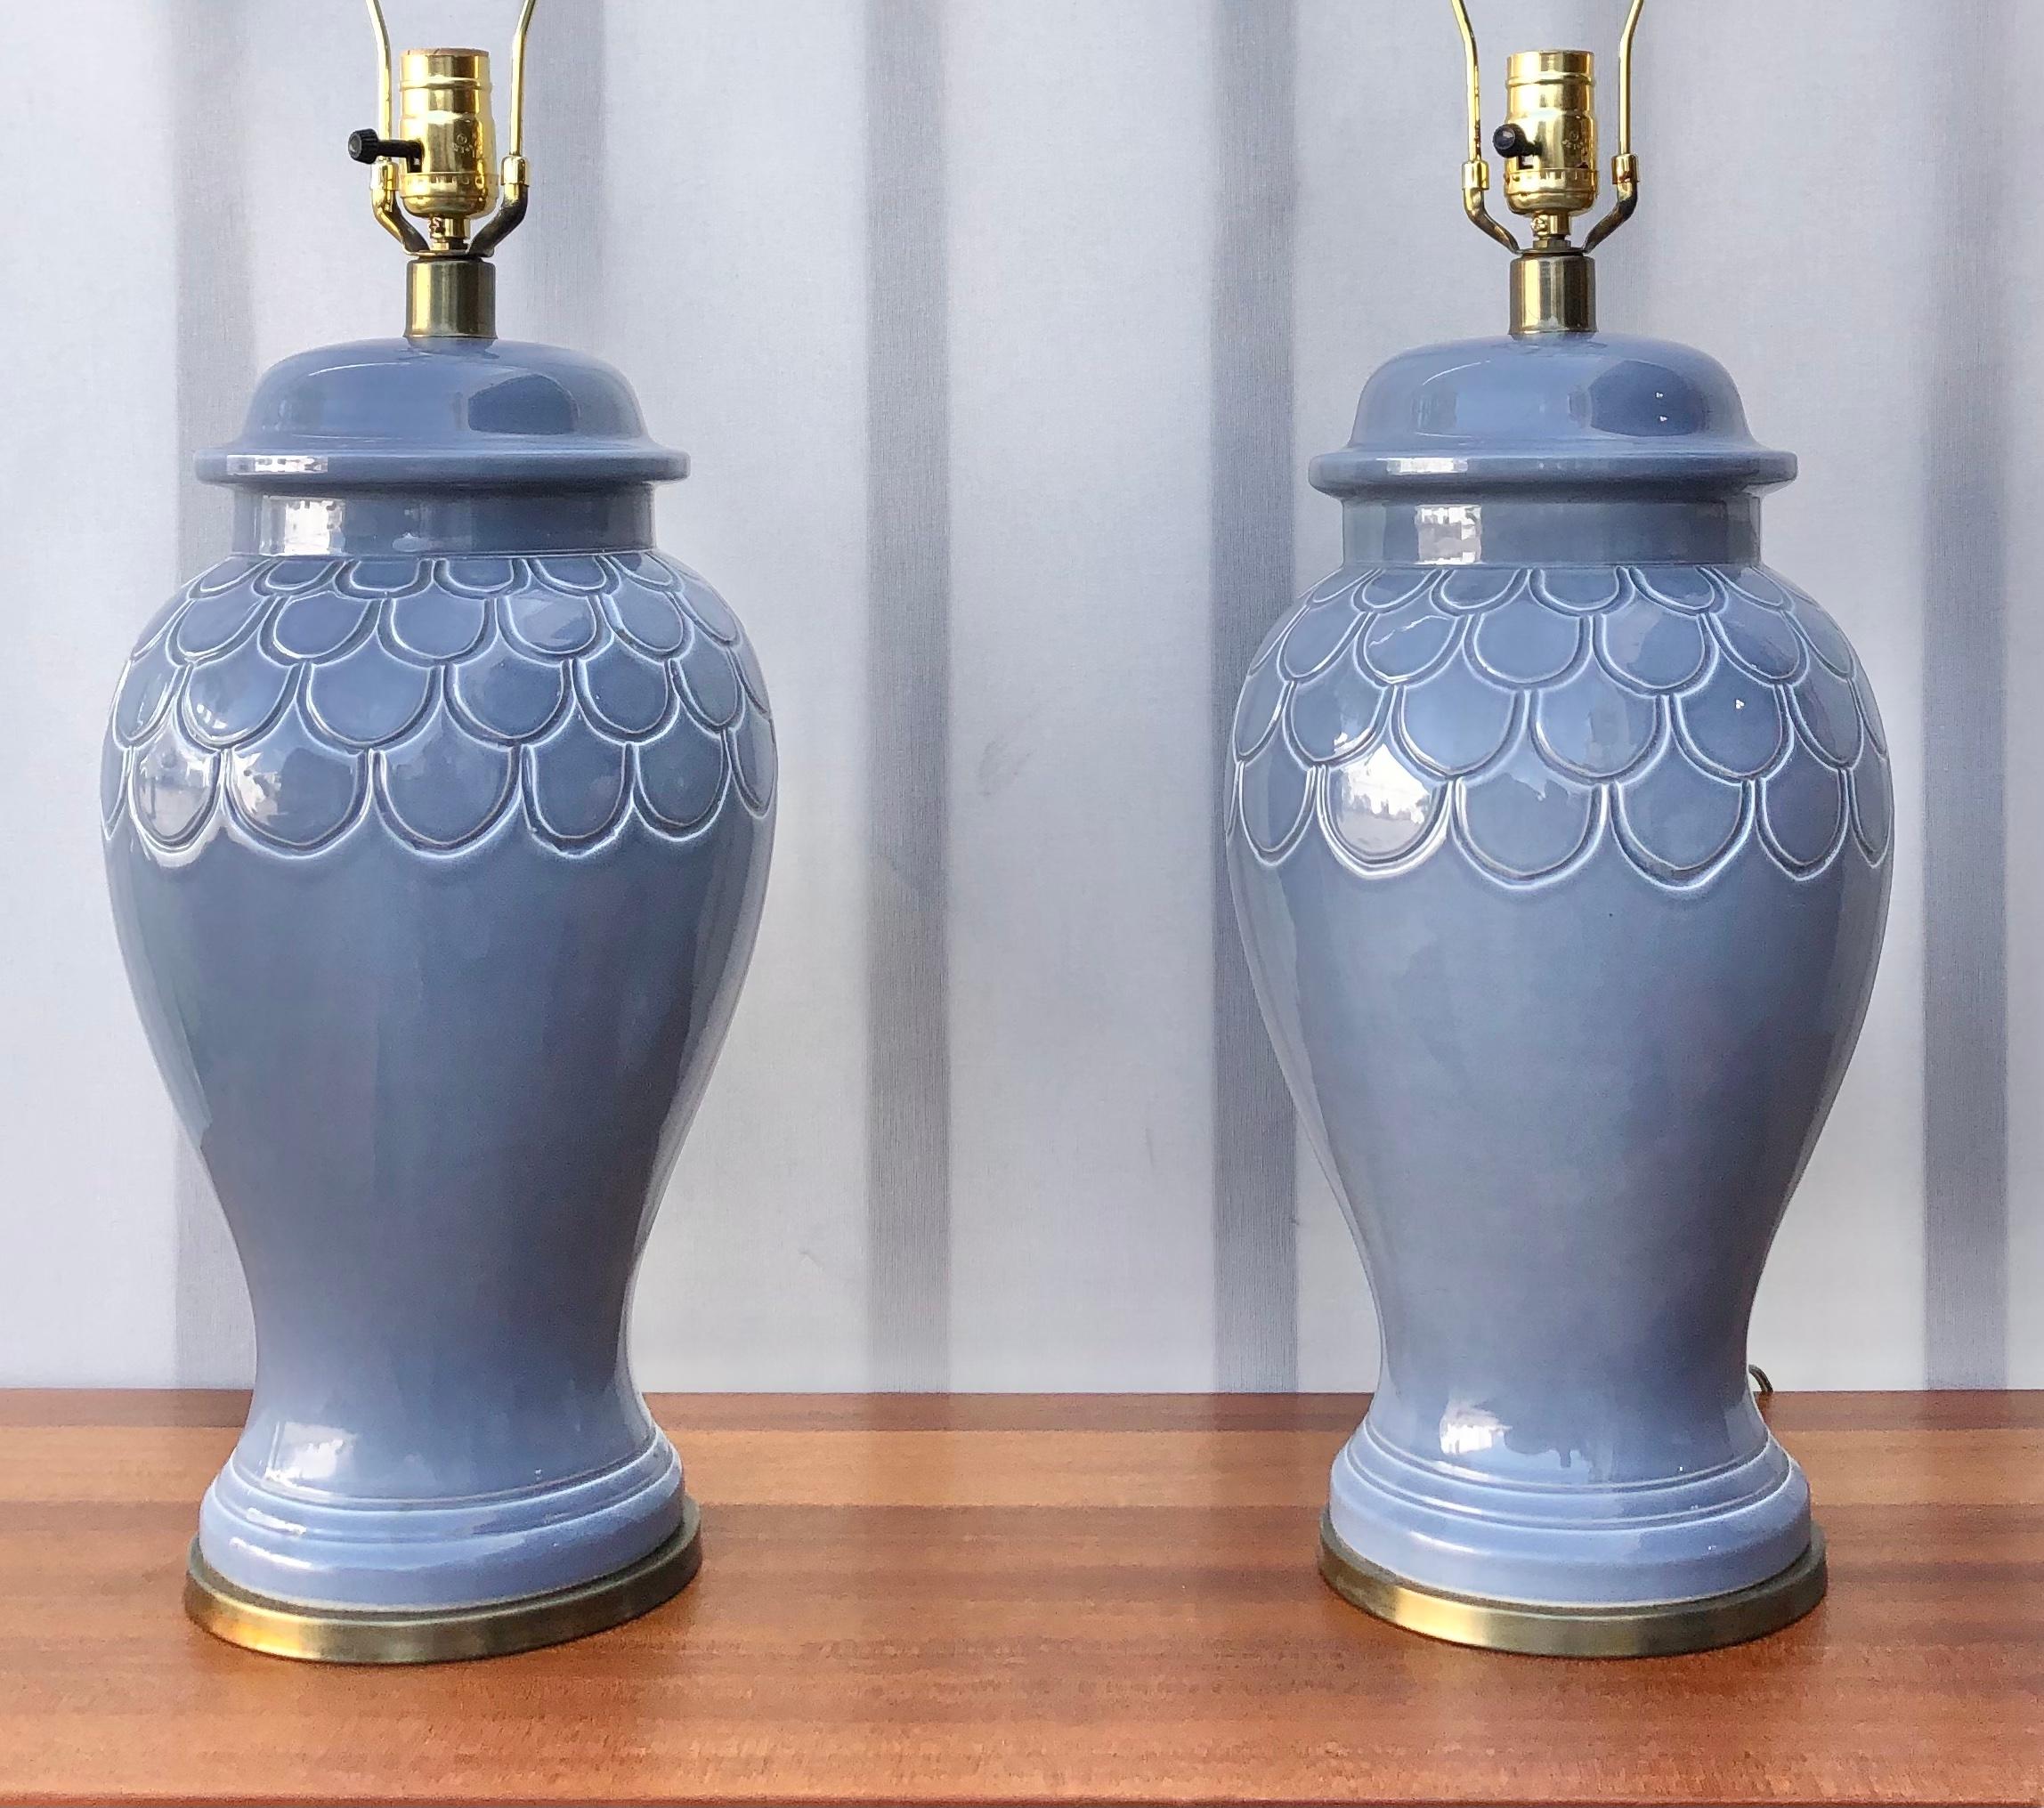 American A Pair of Asian-Inspired Hollywood Regency Ginger Jar Ceramic Lamps. C 1960s  For Sale